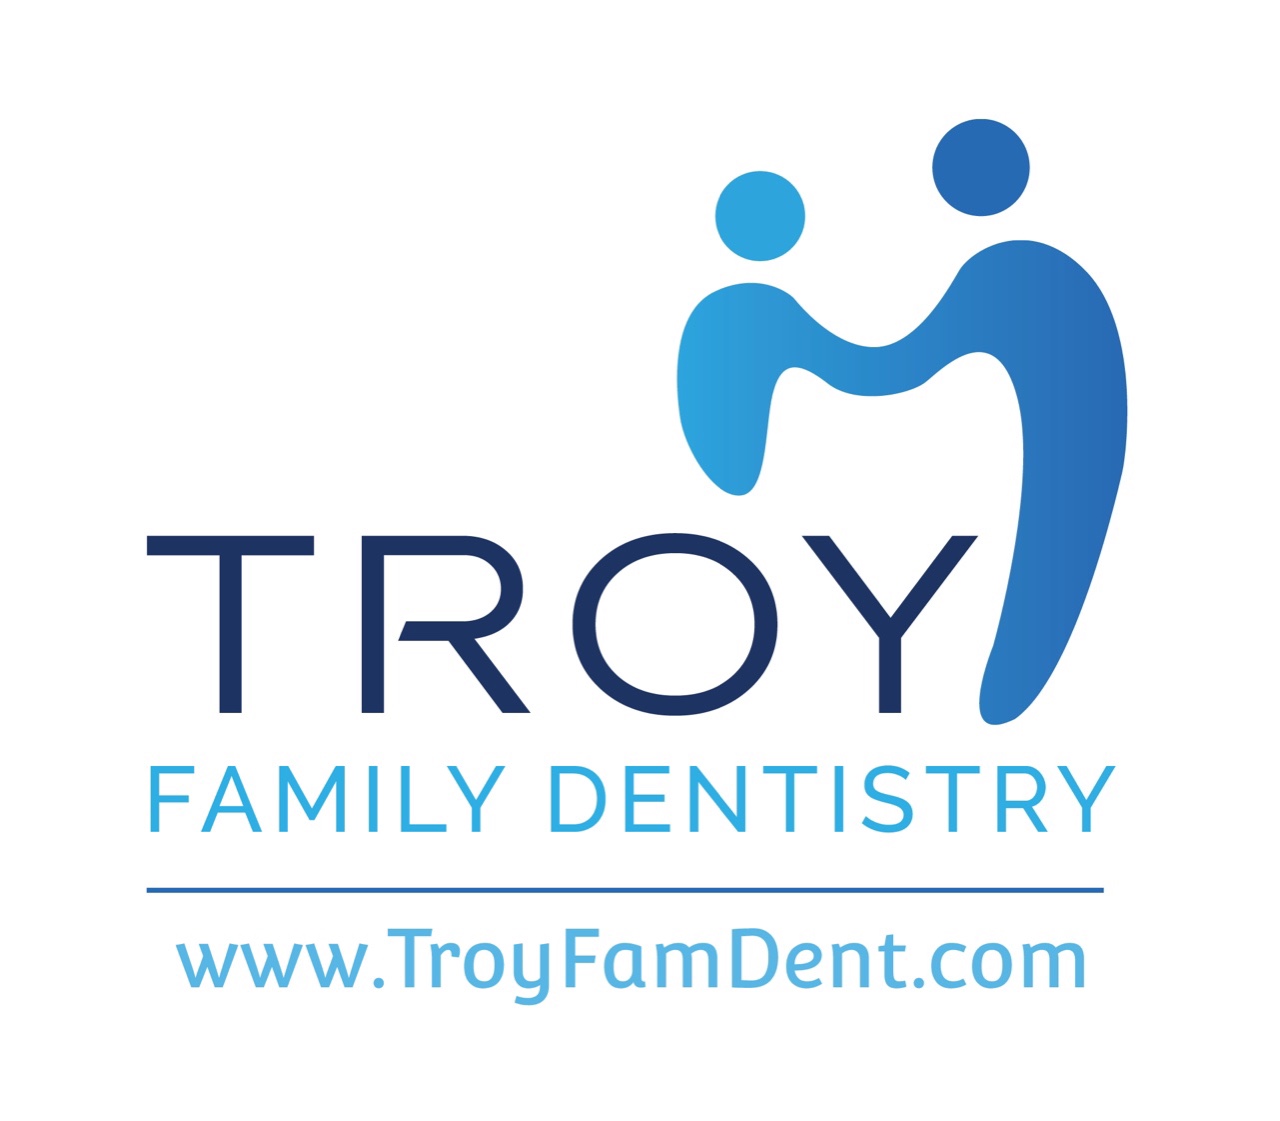 Troy Family Dentistry Launches New Website To Deliver A WOW Experience To Patients